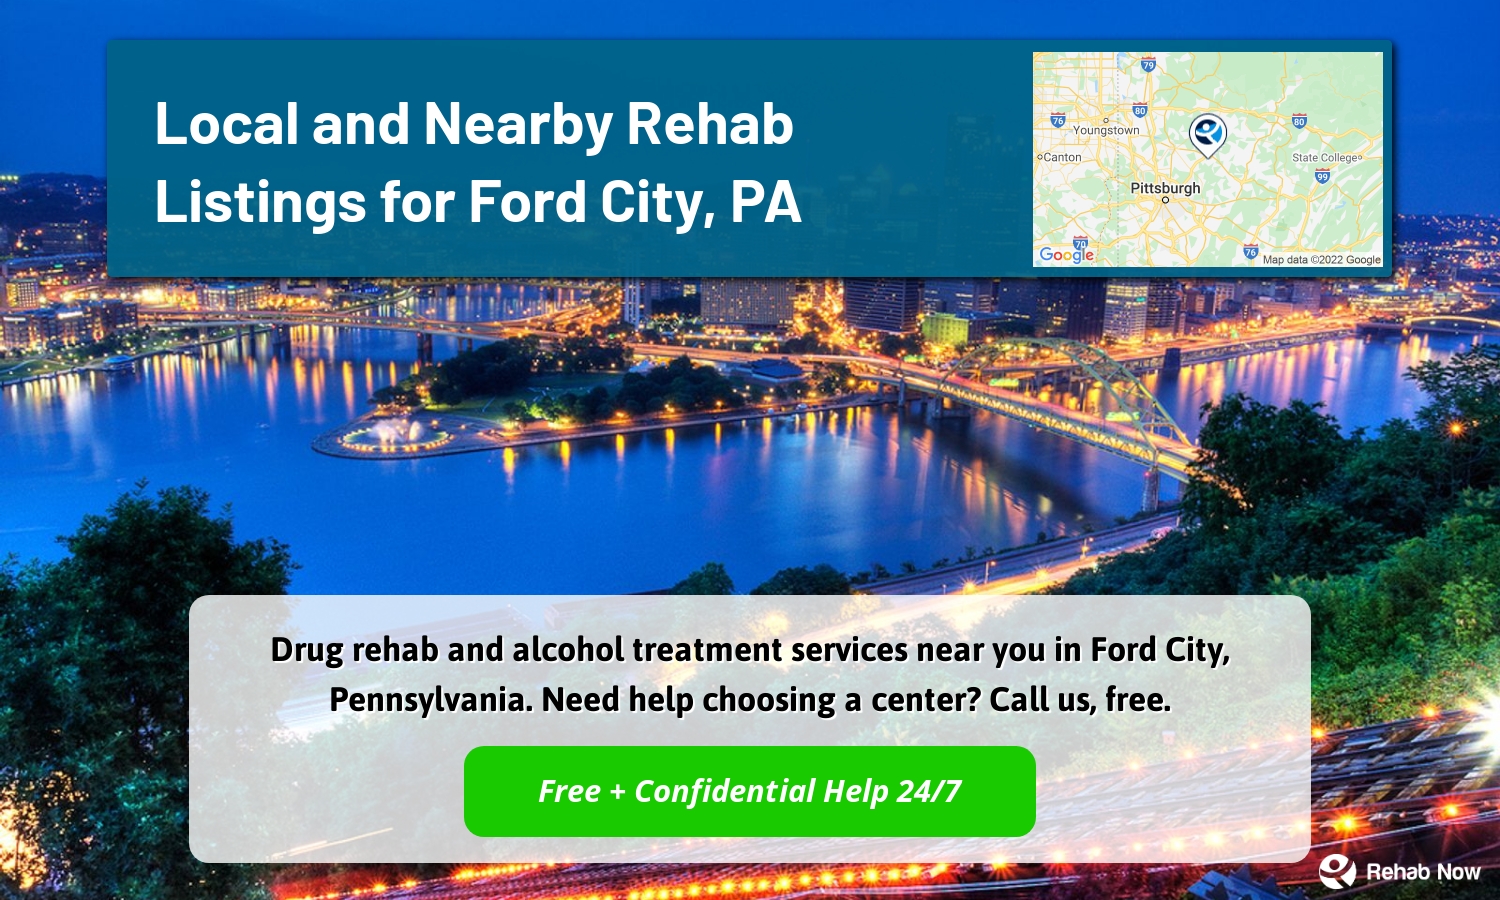 Drug rehab and alcohol treatment services near you in Ford City, Pennsylvania. Need help choosing a center? Call us, free.